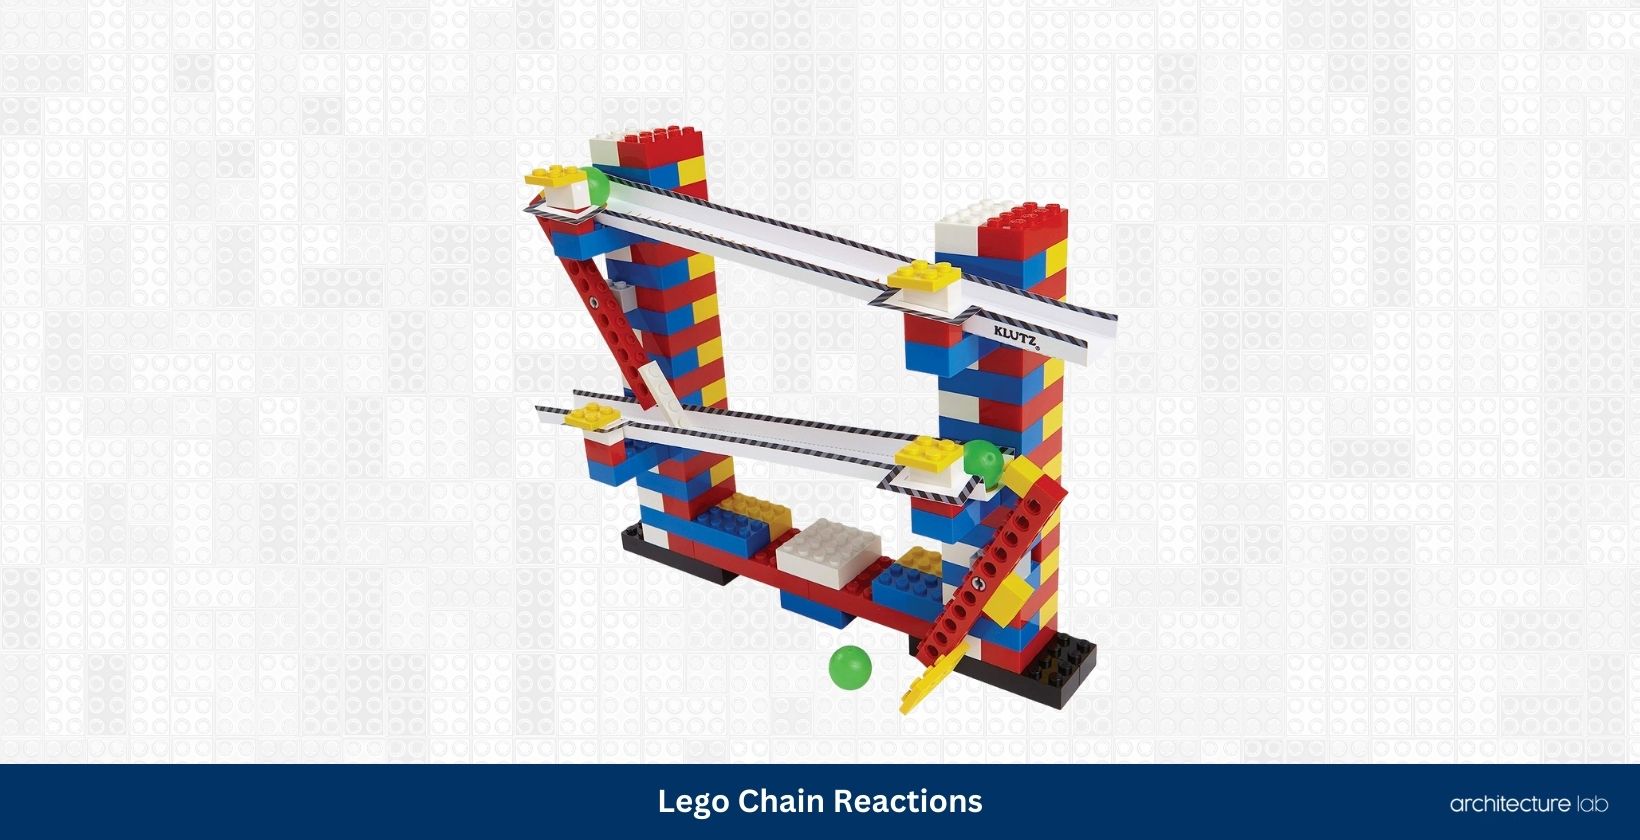 Lego chain reactions